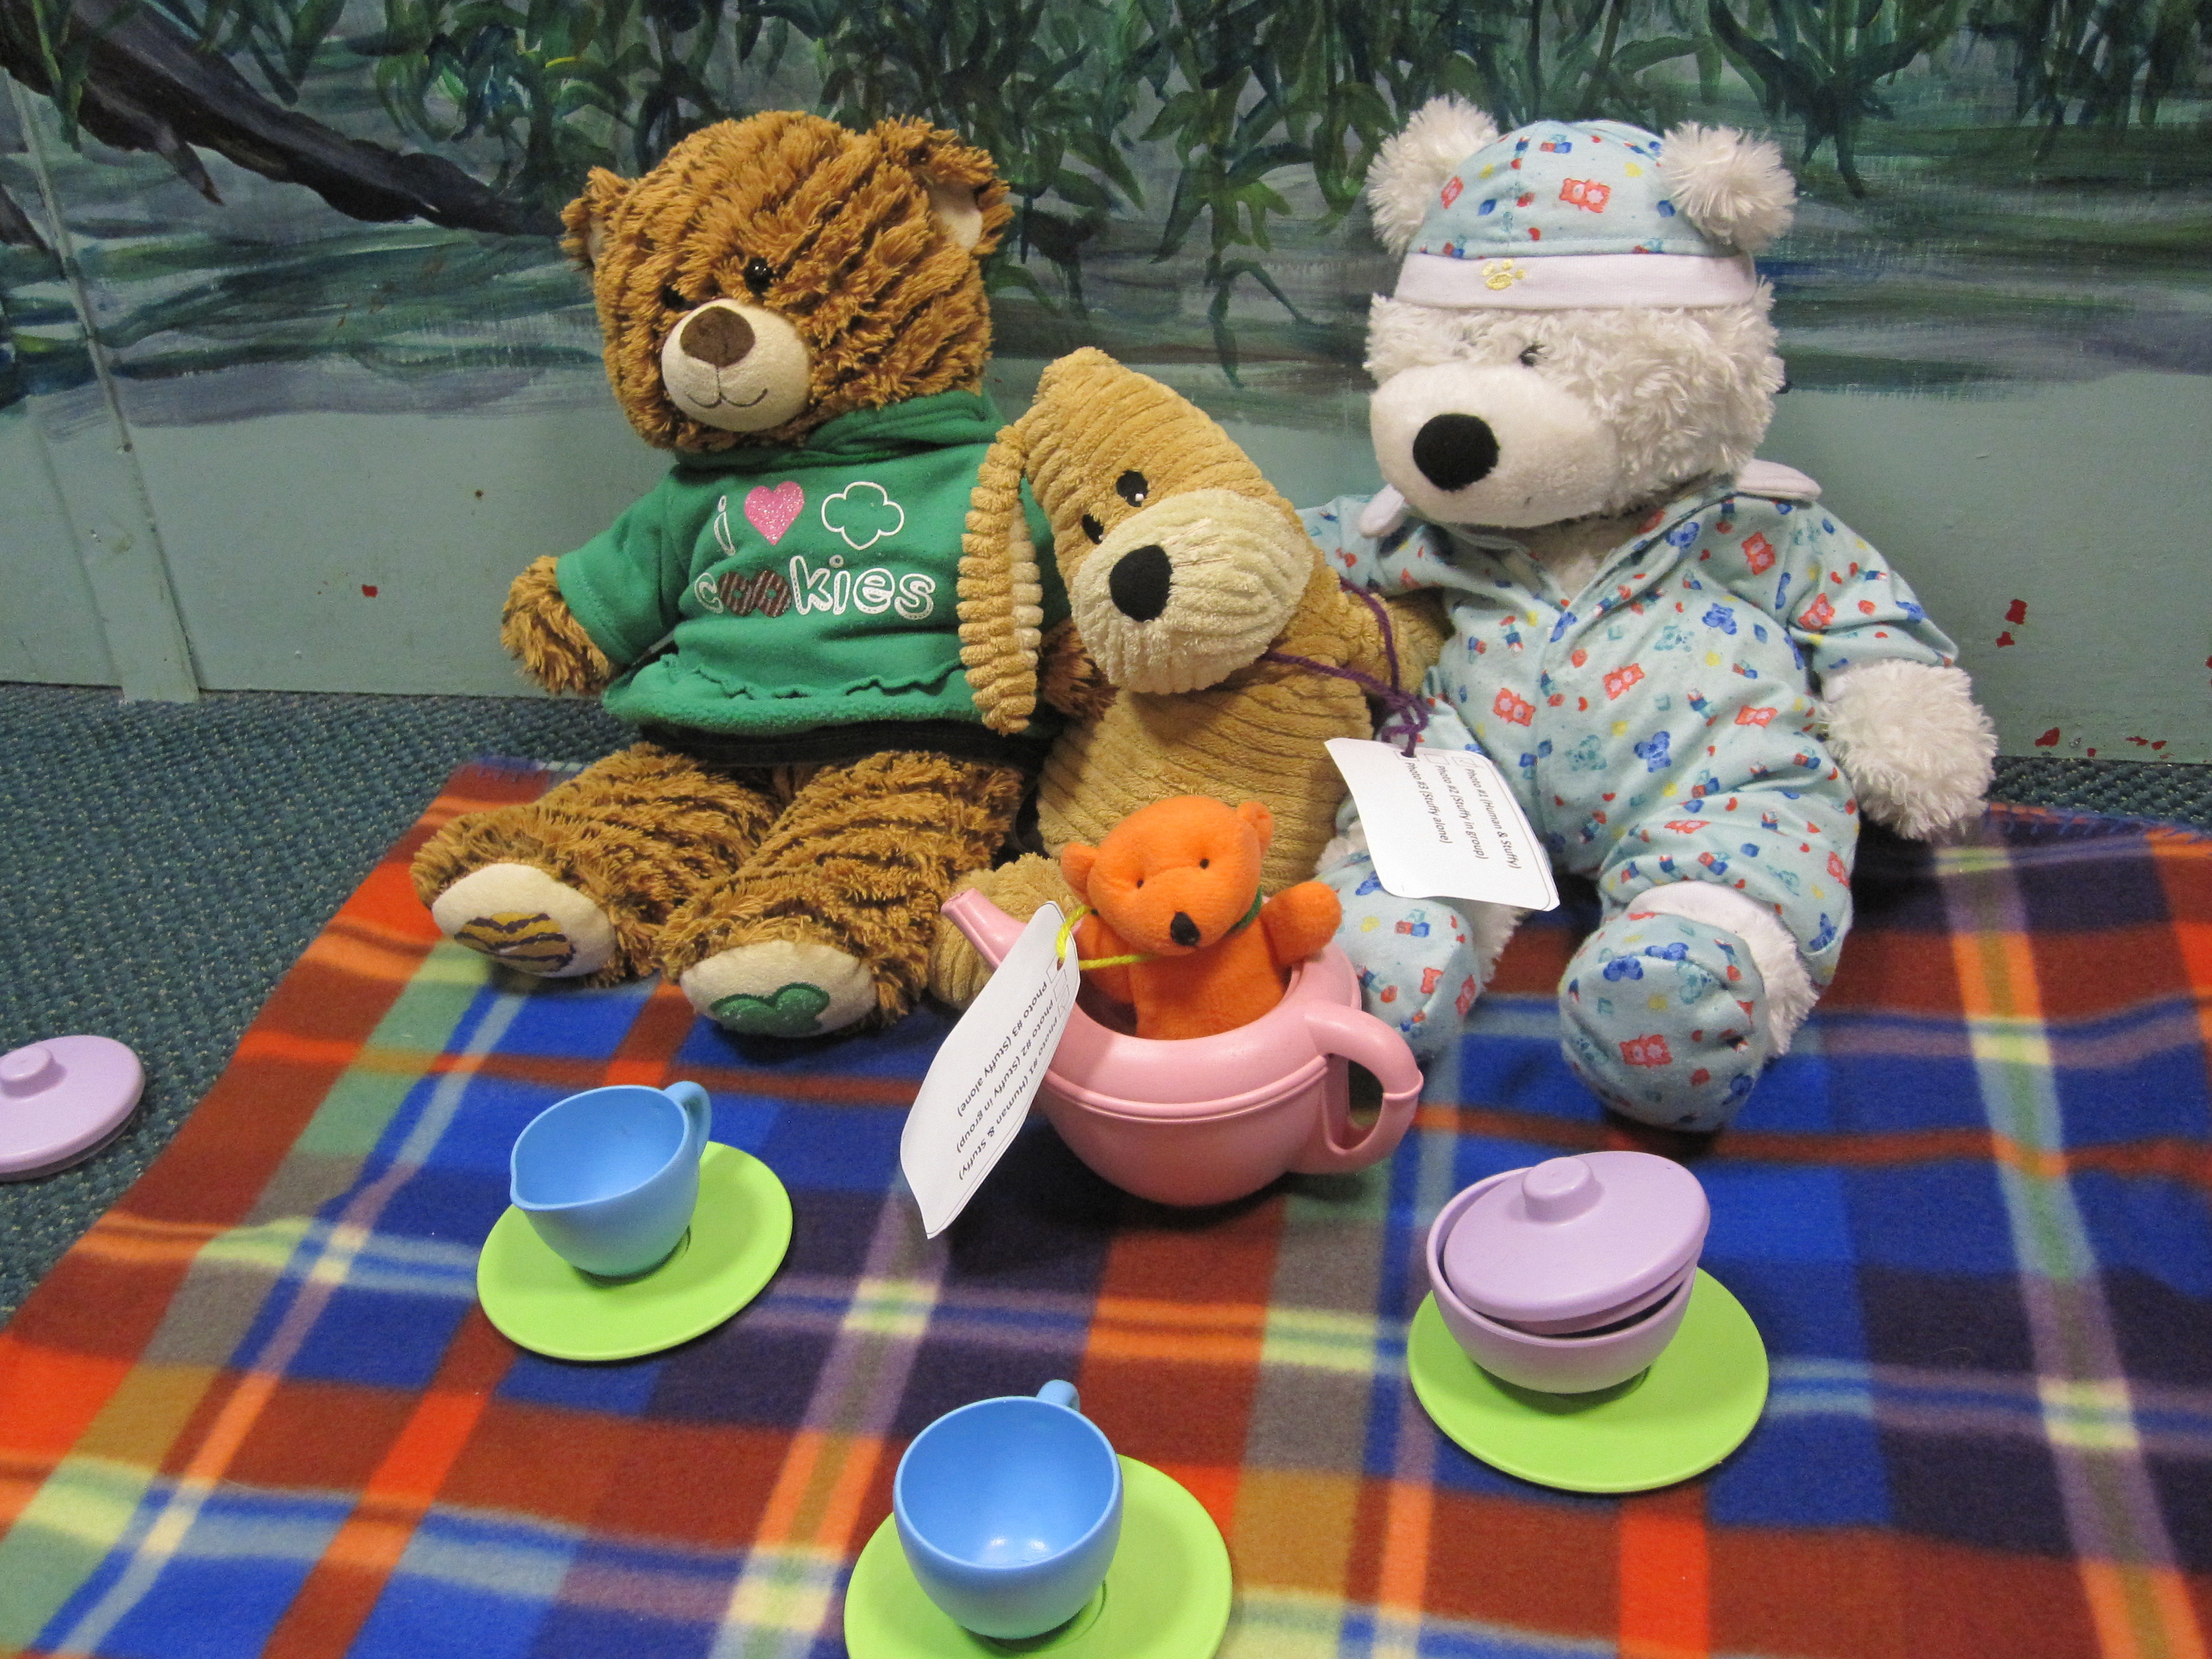 A group of stuffies having a tea party!